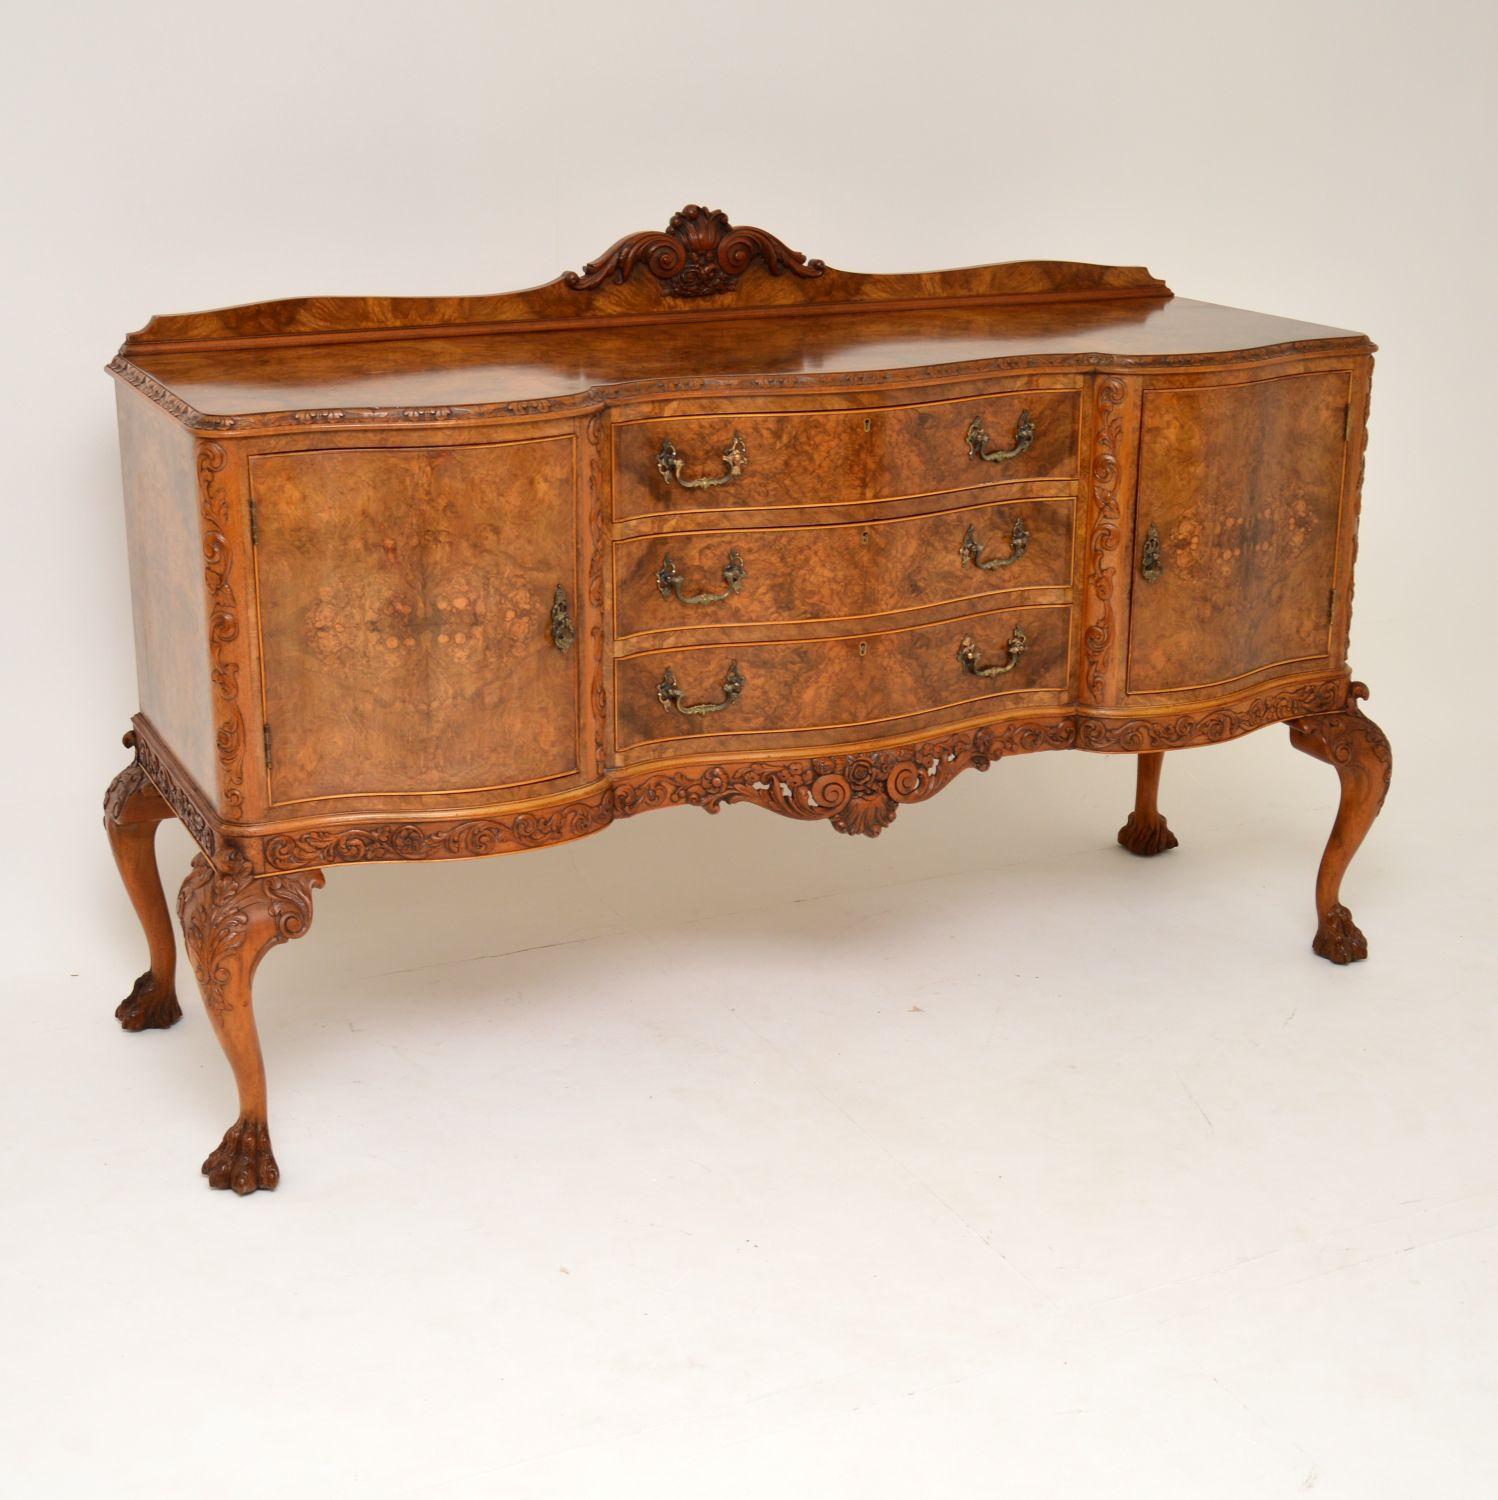 This antique burr walnut sideboard is stunning quality, with a wonderful shape and superb carvings.

This sideboard is antique Queen Anne style in walnut, dating to circa 1920s period. Please enlarge all of the images to see the wonderful deep